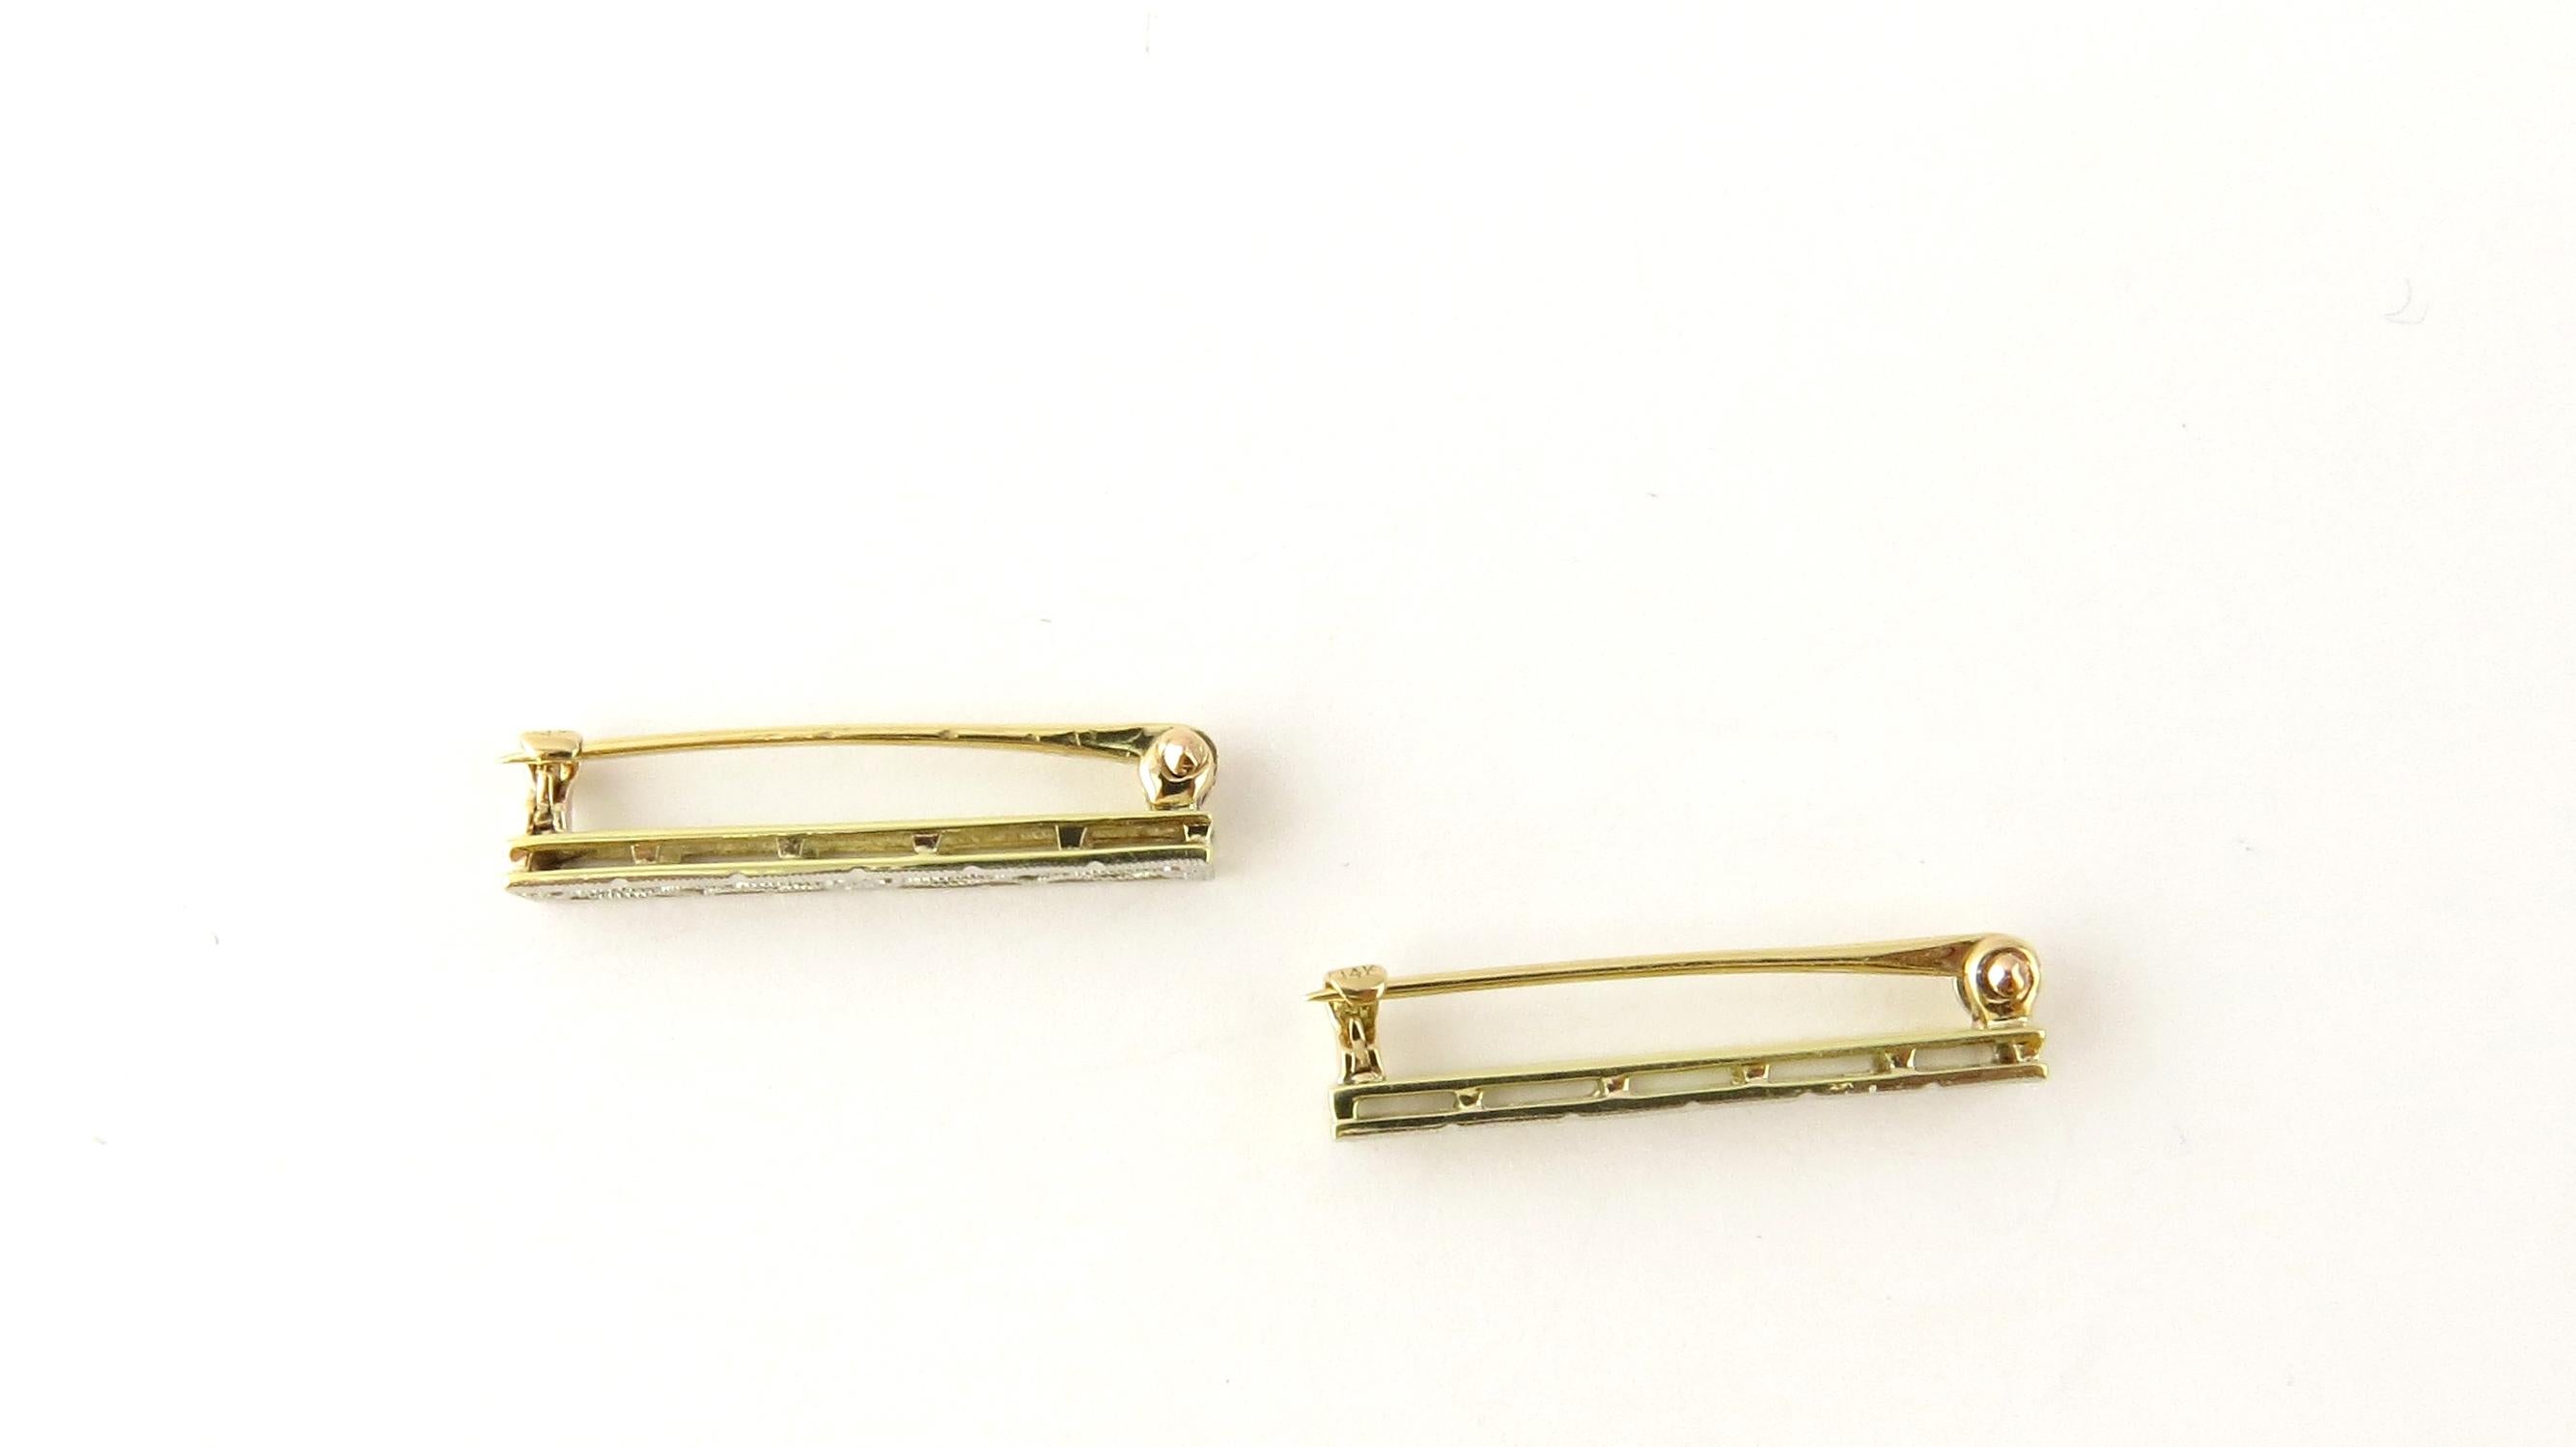 Vintage 14 Karat Yellow Gold Baby Pins

These dainty pins feature a beautifully detailed floral design in classic 14K yellow gold.

Size: 22 mm x 3 mm each

Weight: 1.2 dwt. / 2.0 gr.

Stamped: 14K

Very good condition, professionally polished. Will